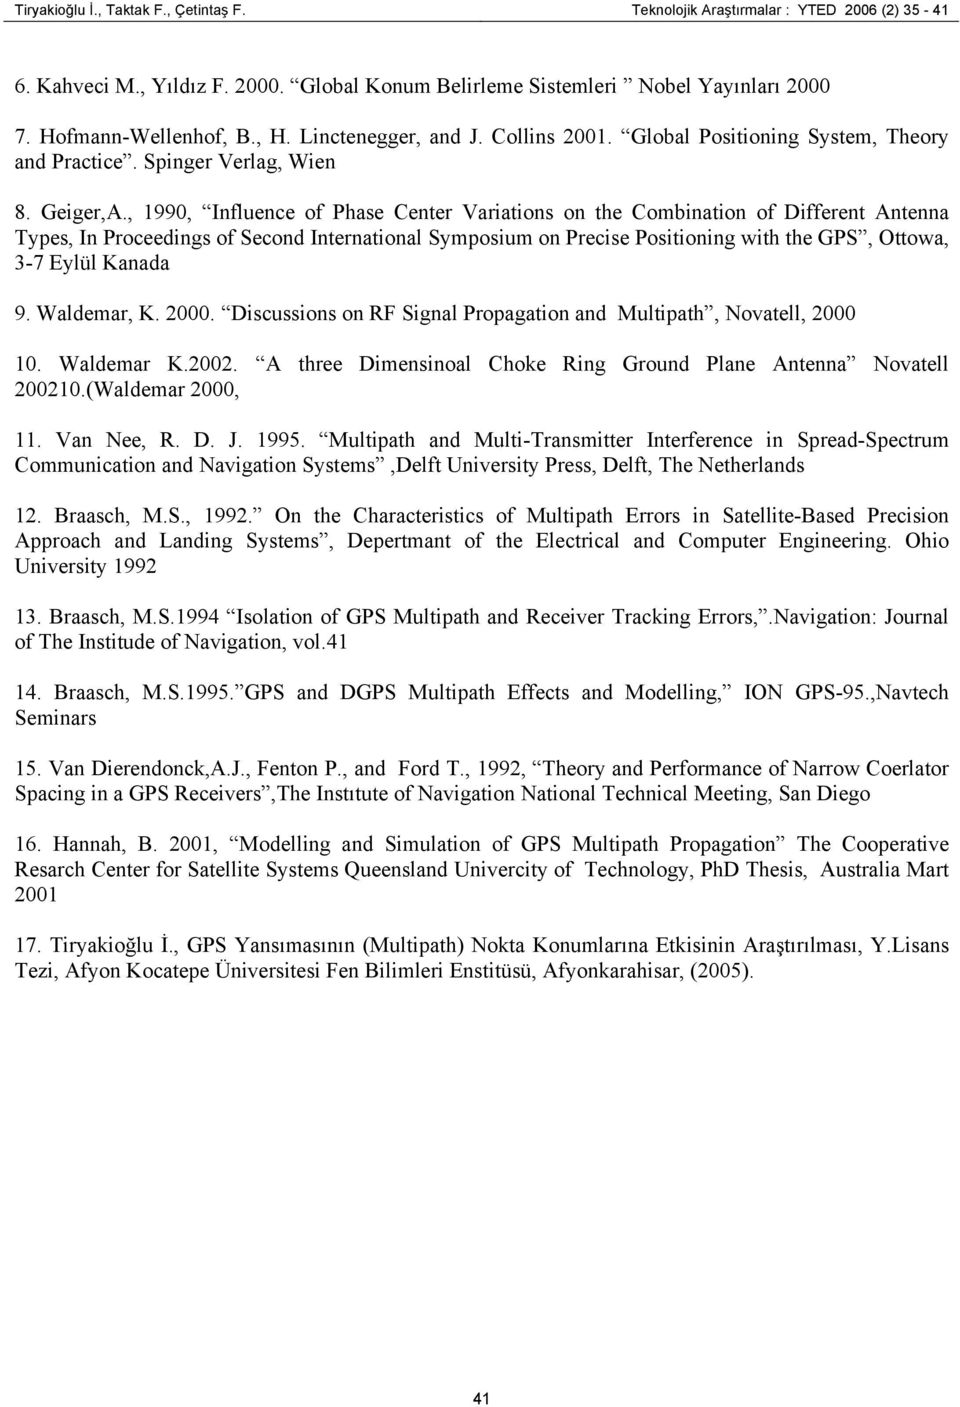 , 1990, Influence of Phase Center Variations on the Combination of Different Antenna Types, In Proceedings of Second International Symposium on Precise Positioning with the GPS, Ottowa, 3-7 Eylül